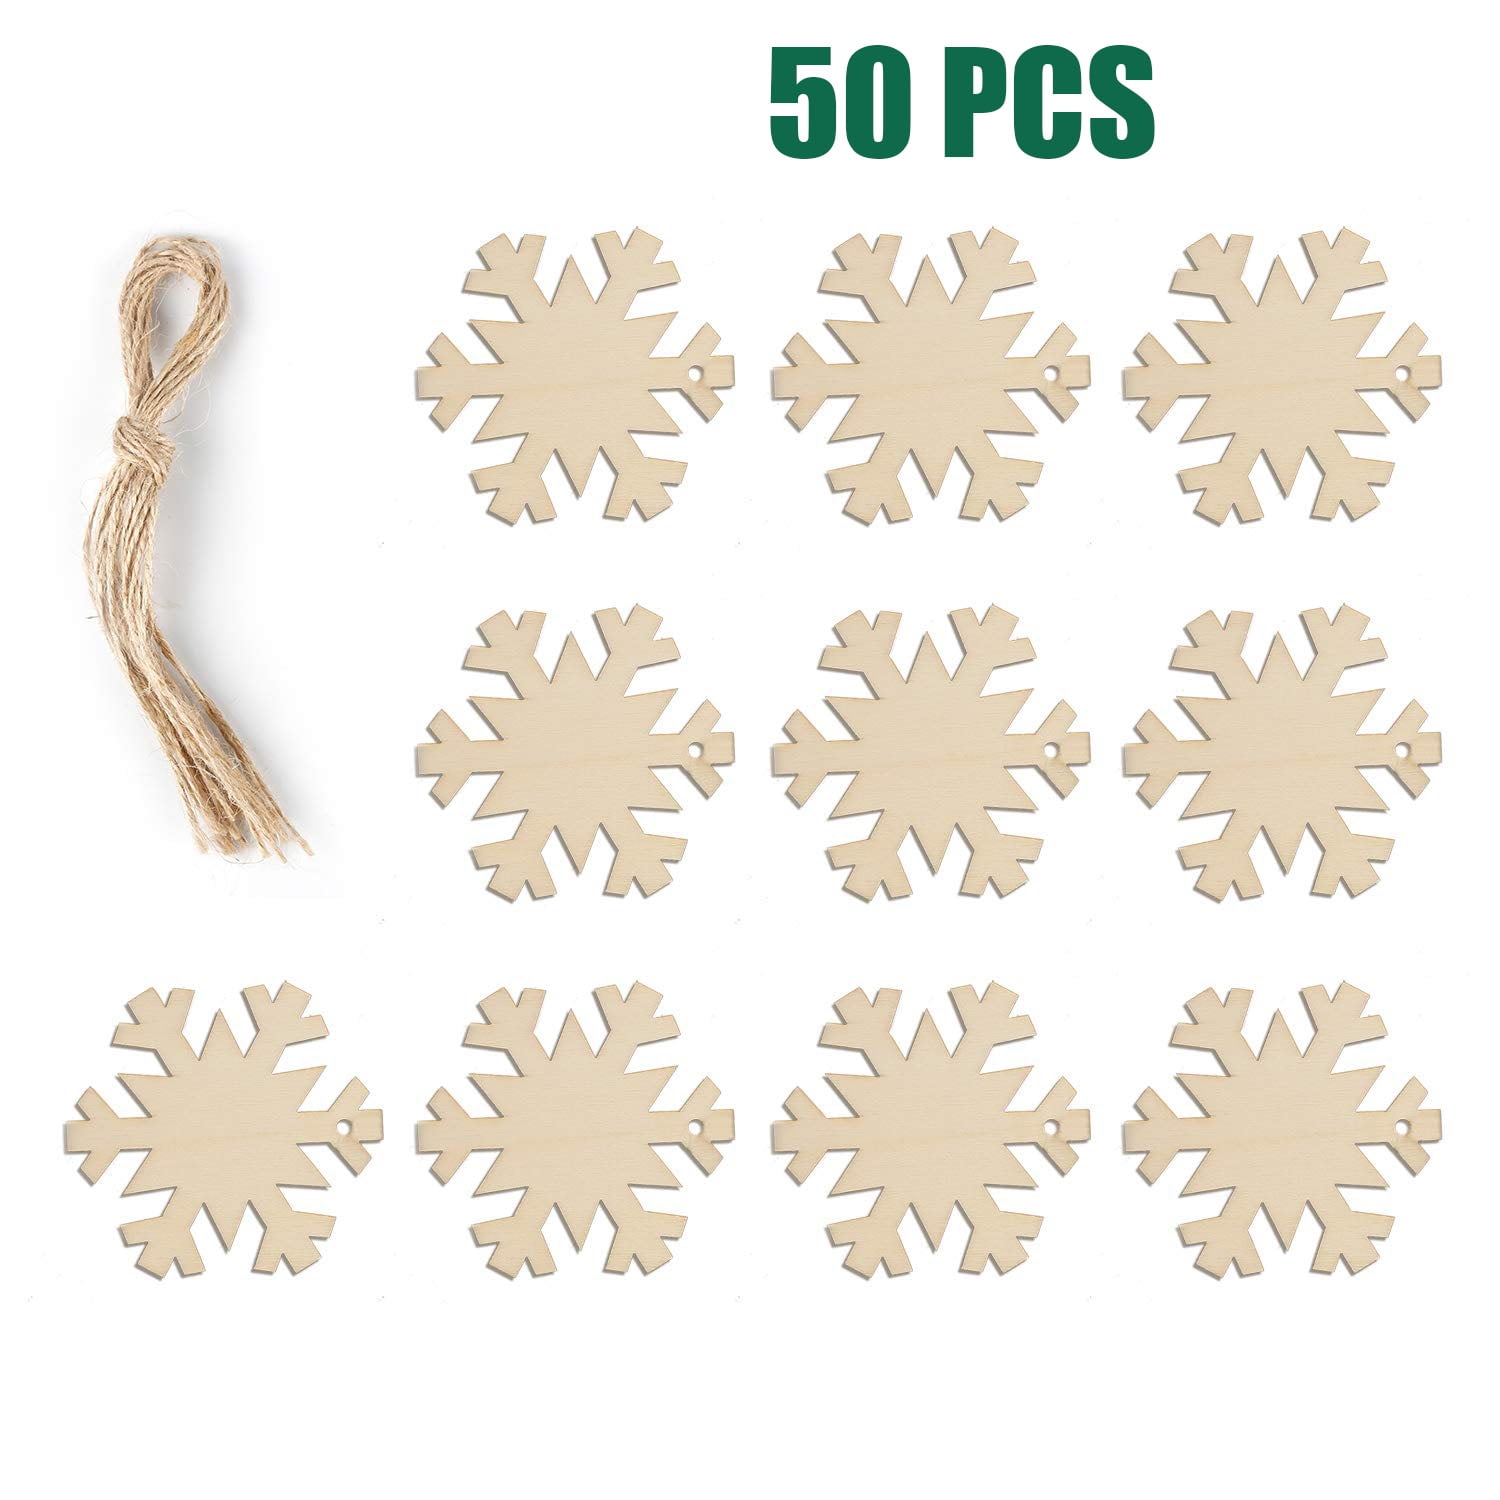 Set of 2 3.75 Inches Snowflake Family Ornament /Snowflake Wall Hanging Car Ornament Unstained Natural Color